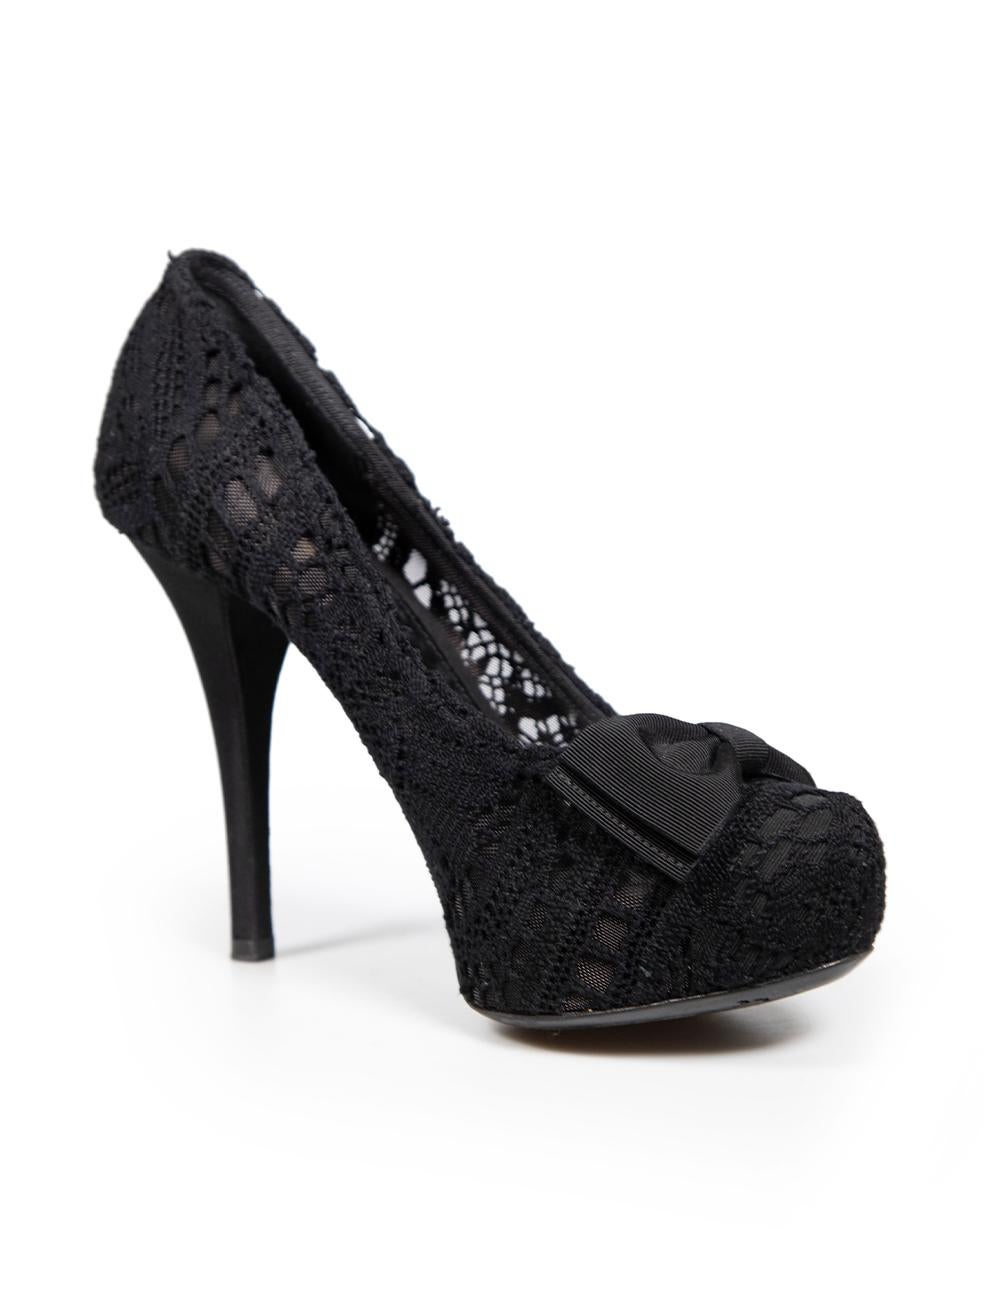 CONDITION is Very good. Minimal wear to heels is evident. General wear to soles on this used Dolce & Gabbana designer resale item. This item comes with original box and dust bag.
 
 Details
 Black
 Lace
 Heels
 Almond toe
 Front bow detail
 High